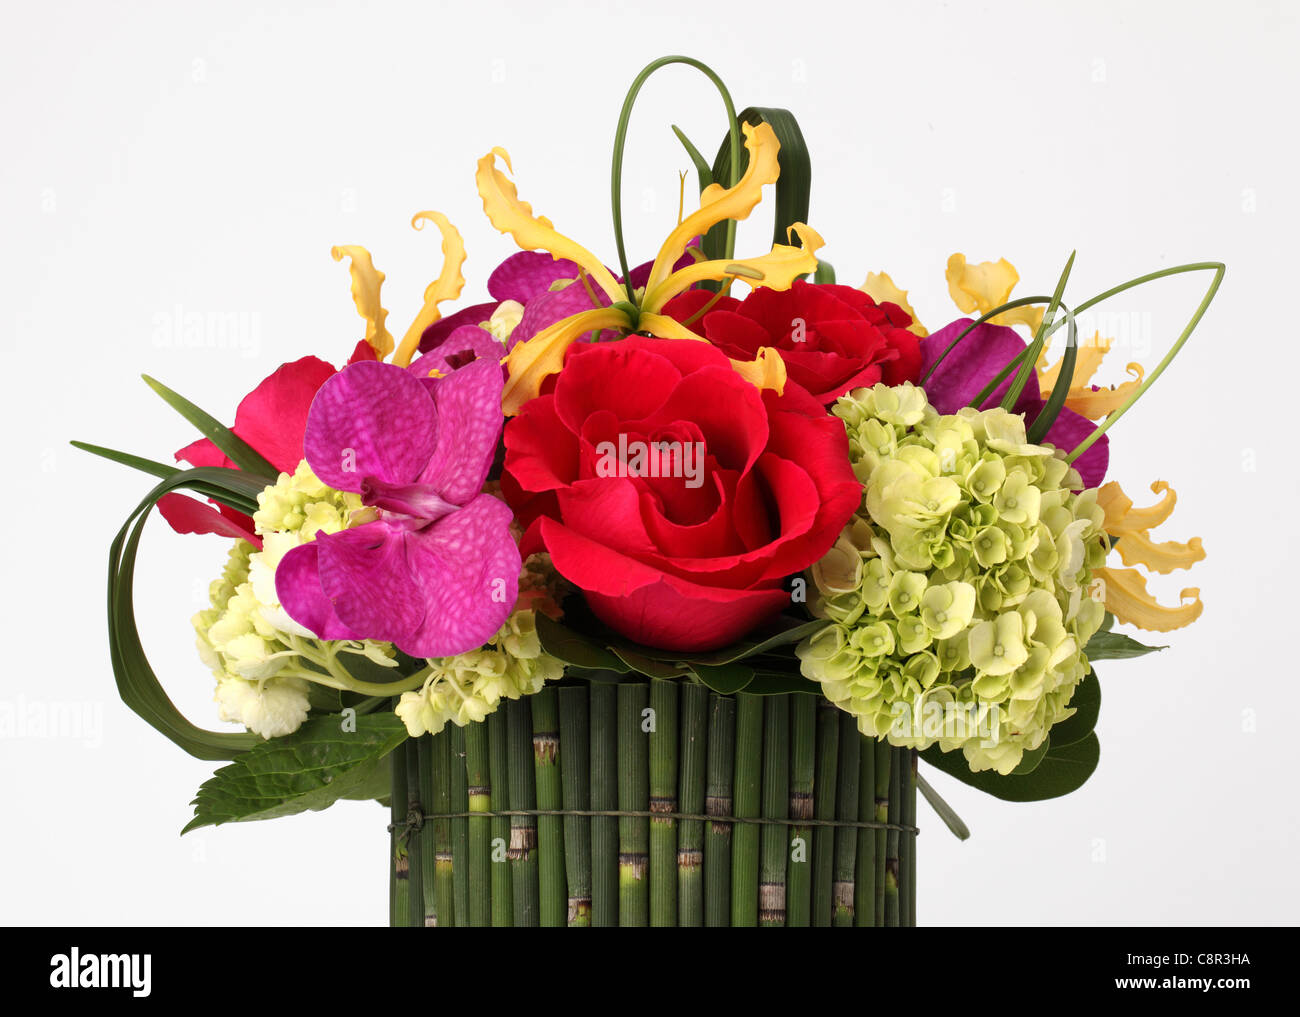 A colorful bouquet of flowers in a vase. Red roses, cream hydrangea, yellow orchid [Laelia], purple orchid [Vanda] Stock Photo